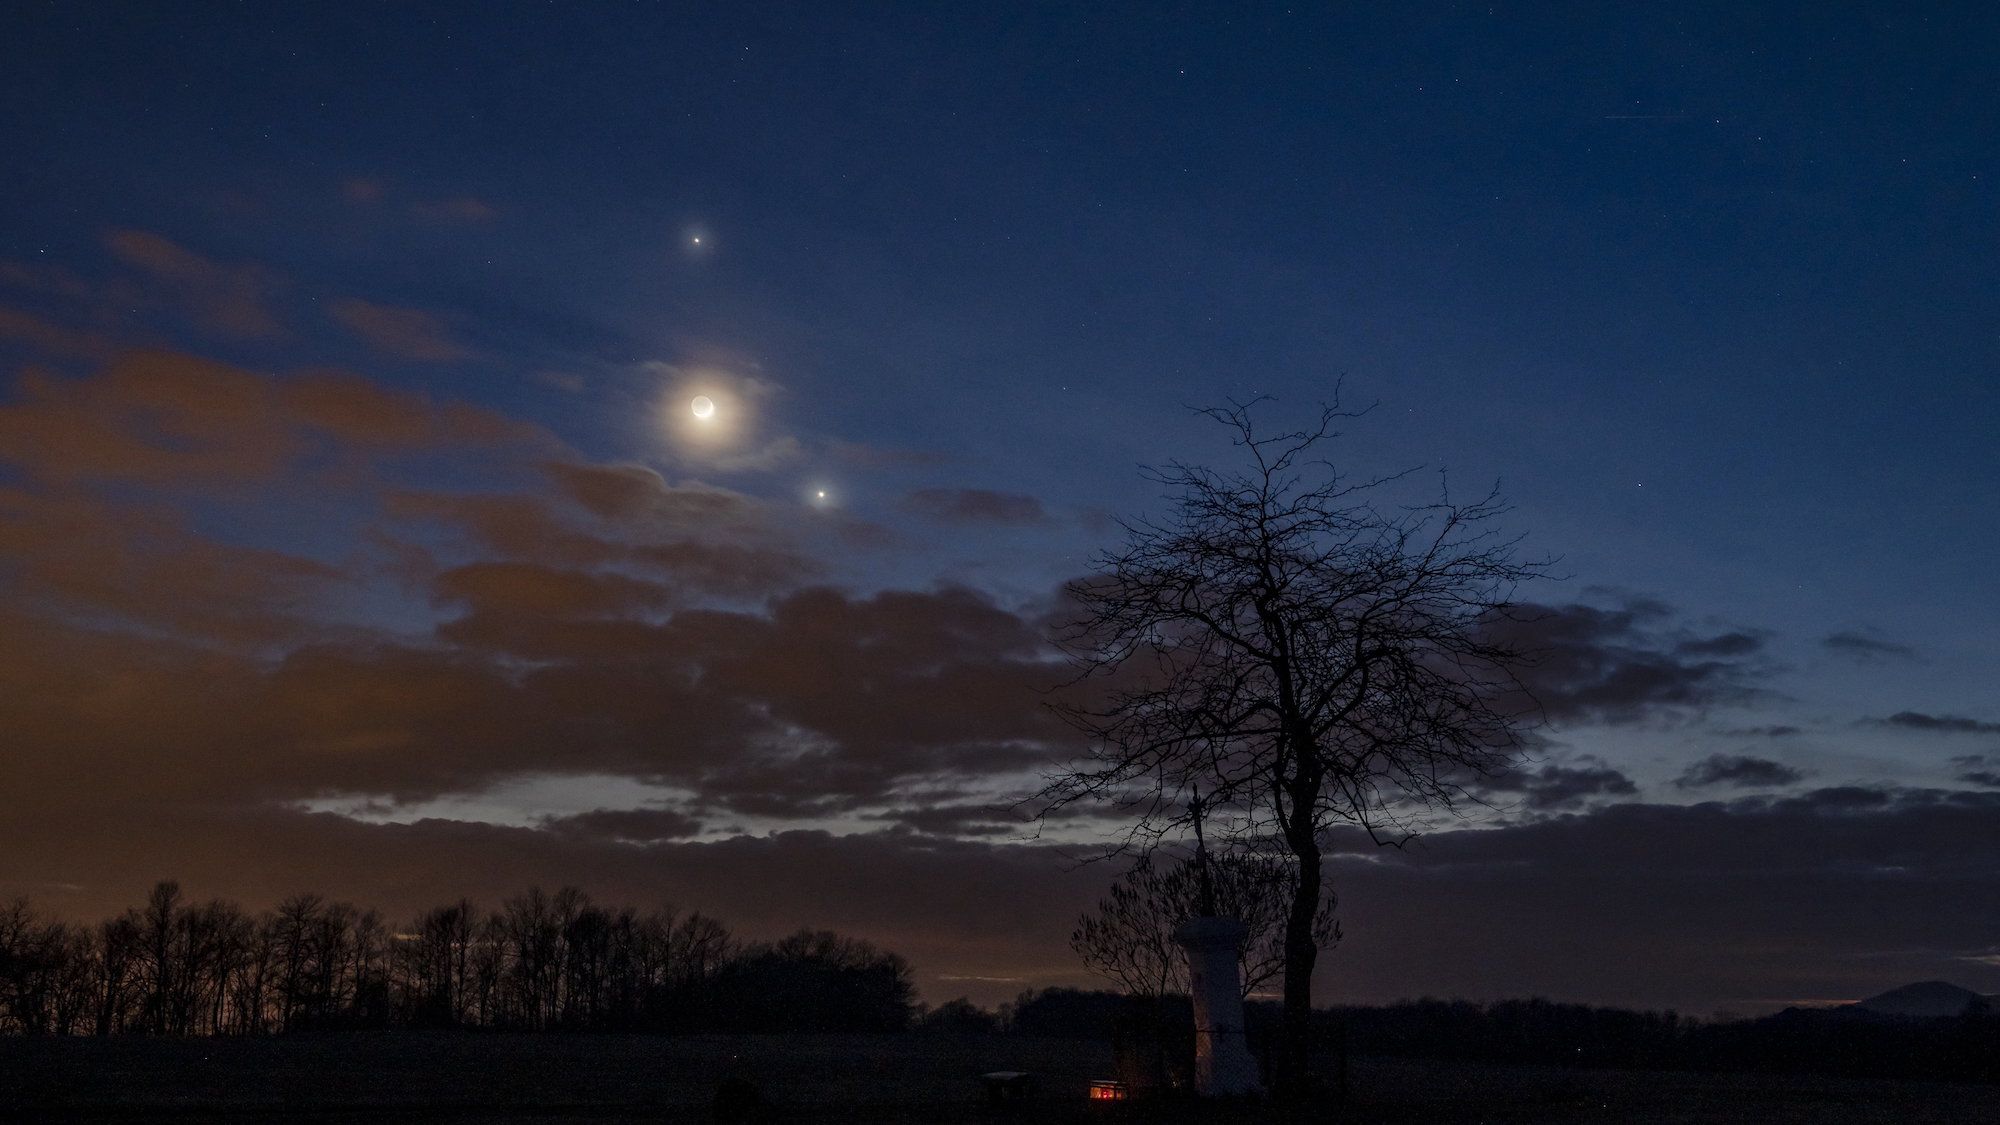 Venus and Jupiter conjunction: How to see it